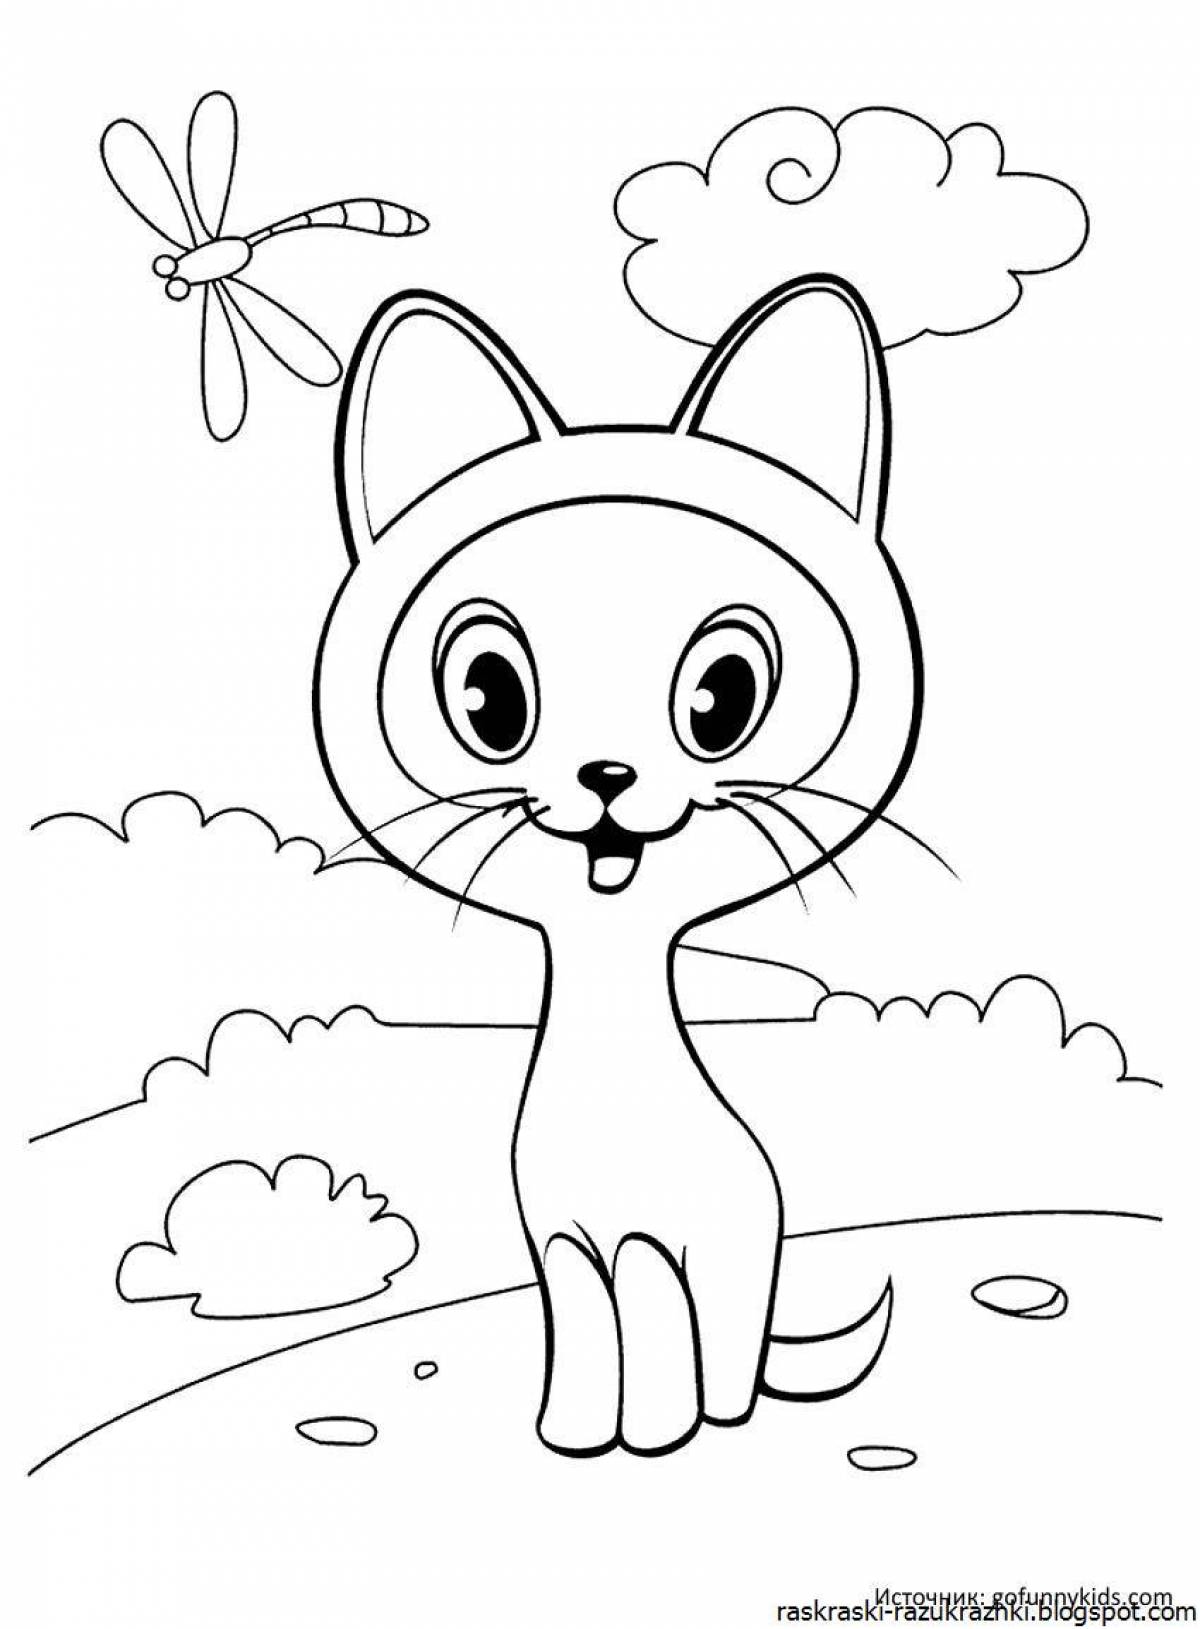 Coloring book cute nosed kitten for kids